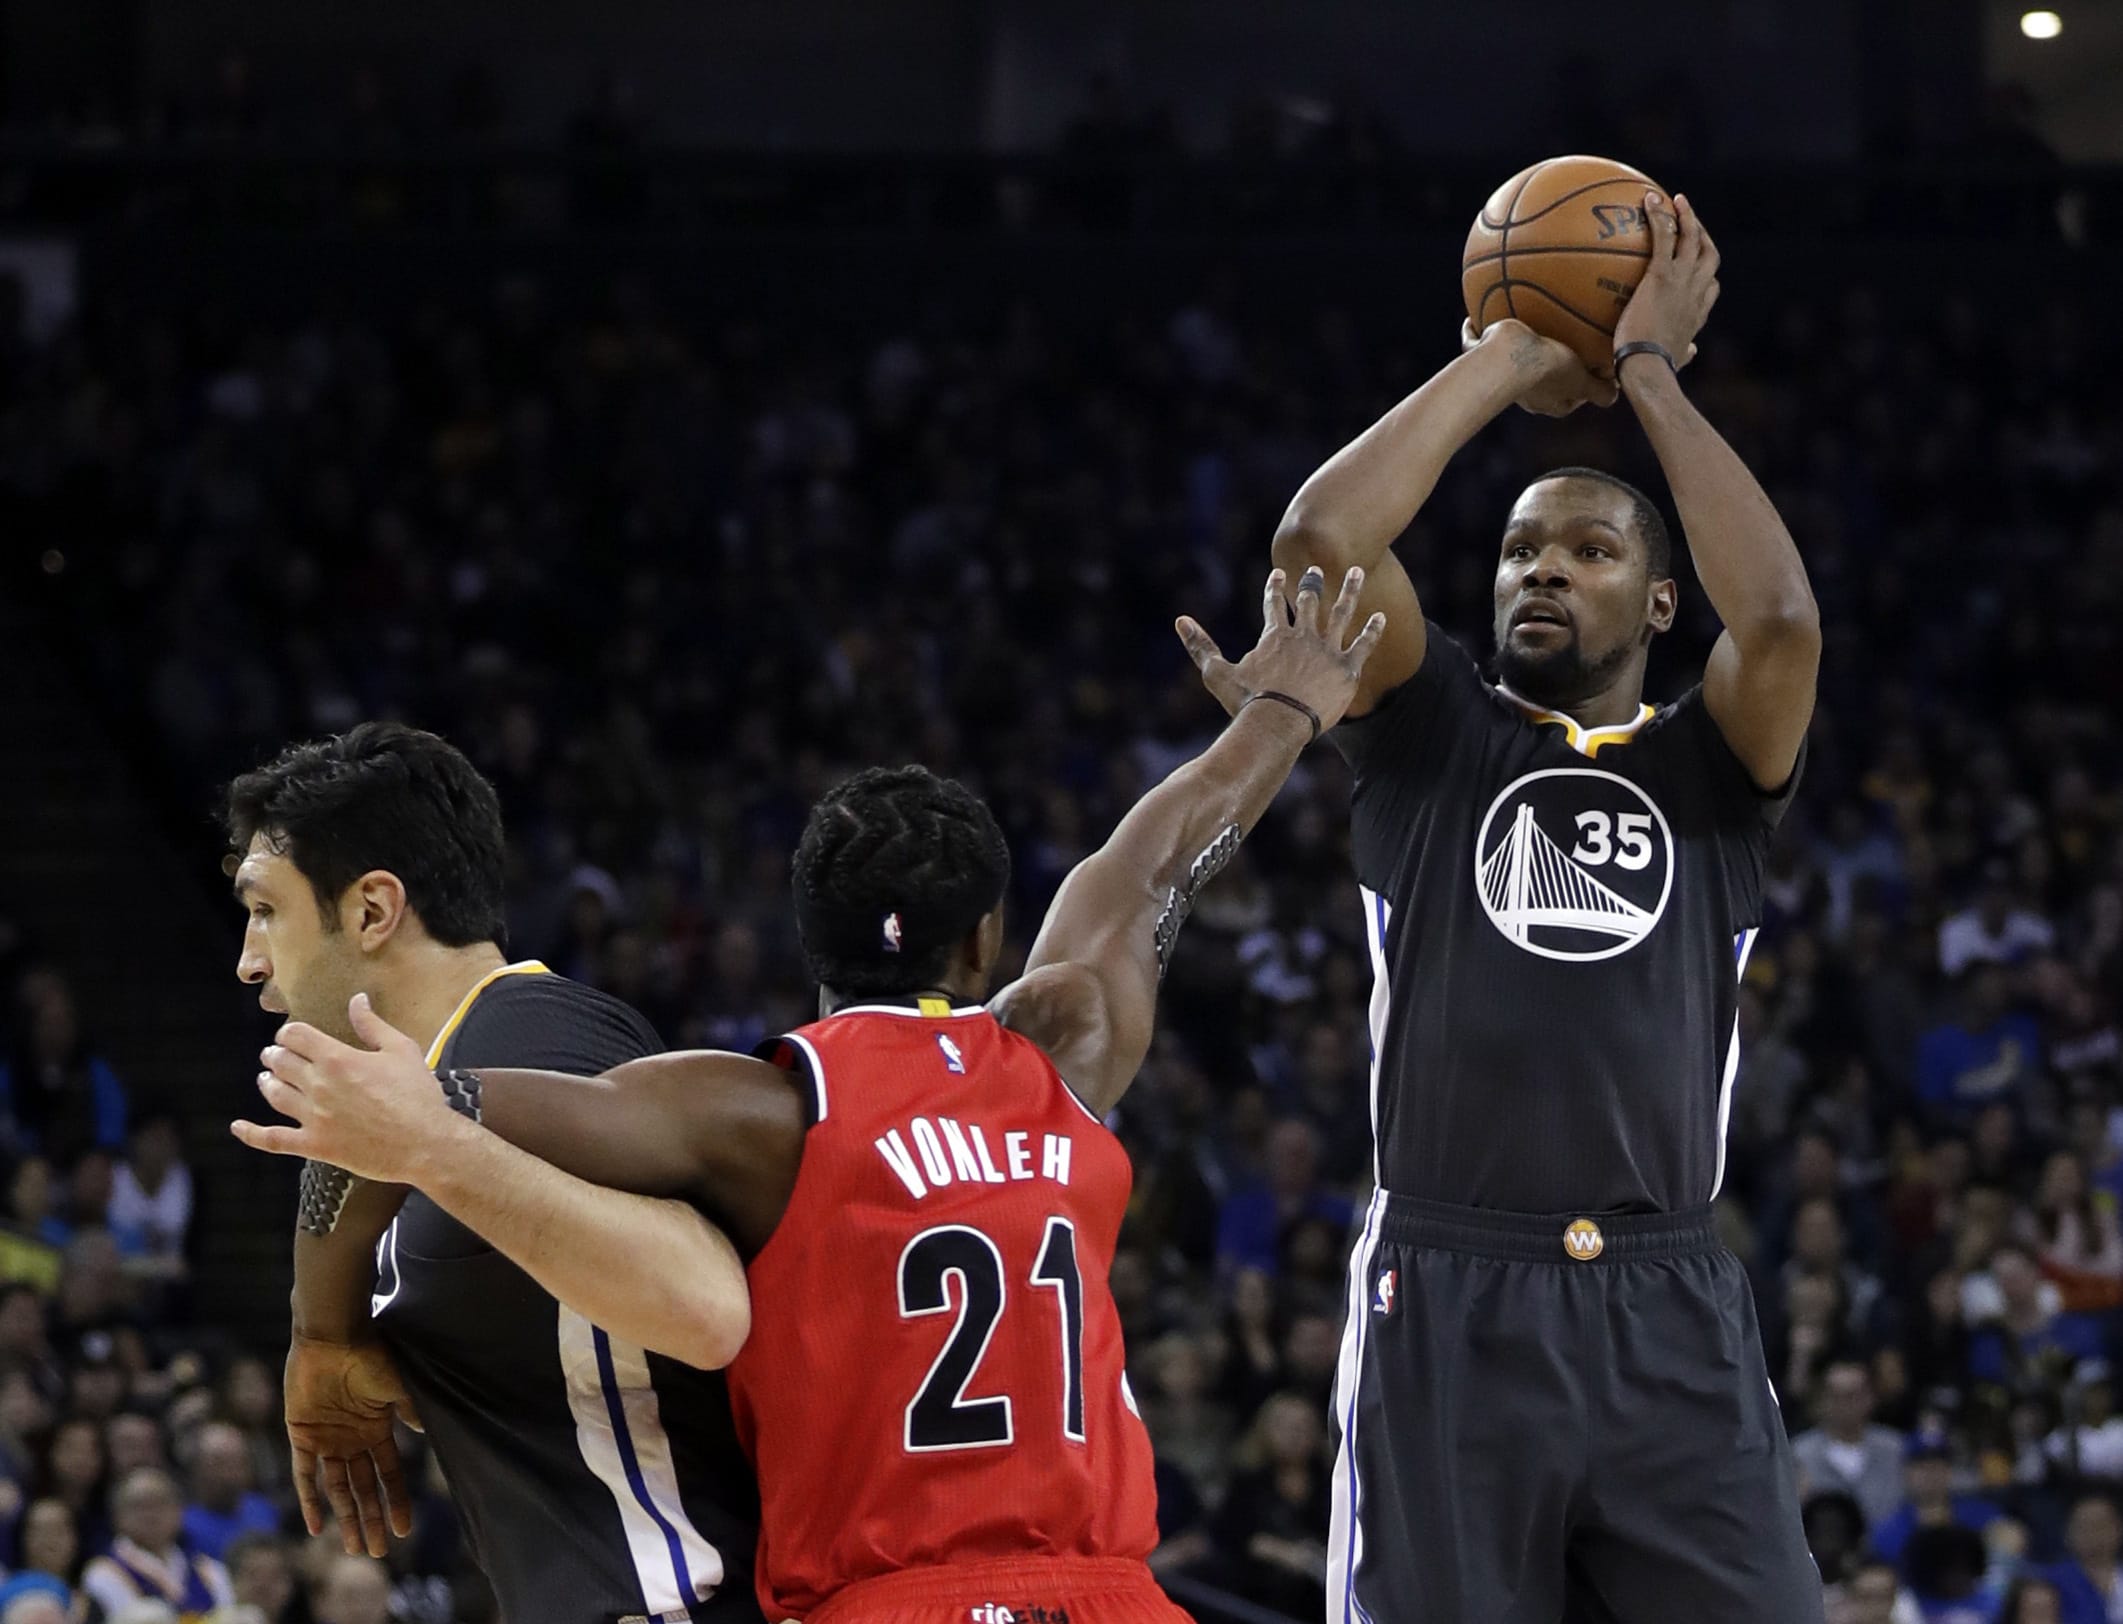 Golden State Warriors' Kevin Durant (35) shoots over Portland Trail Blazers' Noah Vonleh (21) as Zaza Pachulia, left, sets a screen during the second half of an NBA basketball game Saturday, Dec. 17, 2016, in Oakland, Calif.